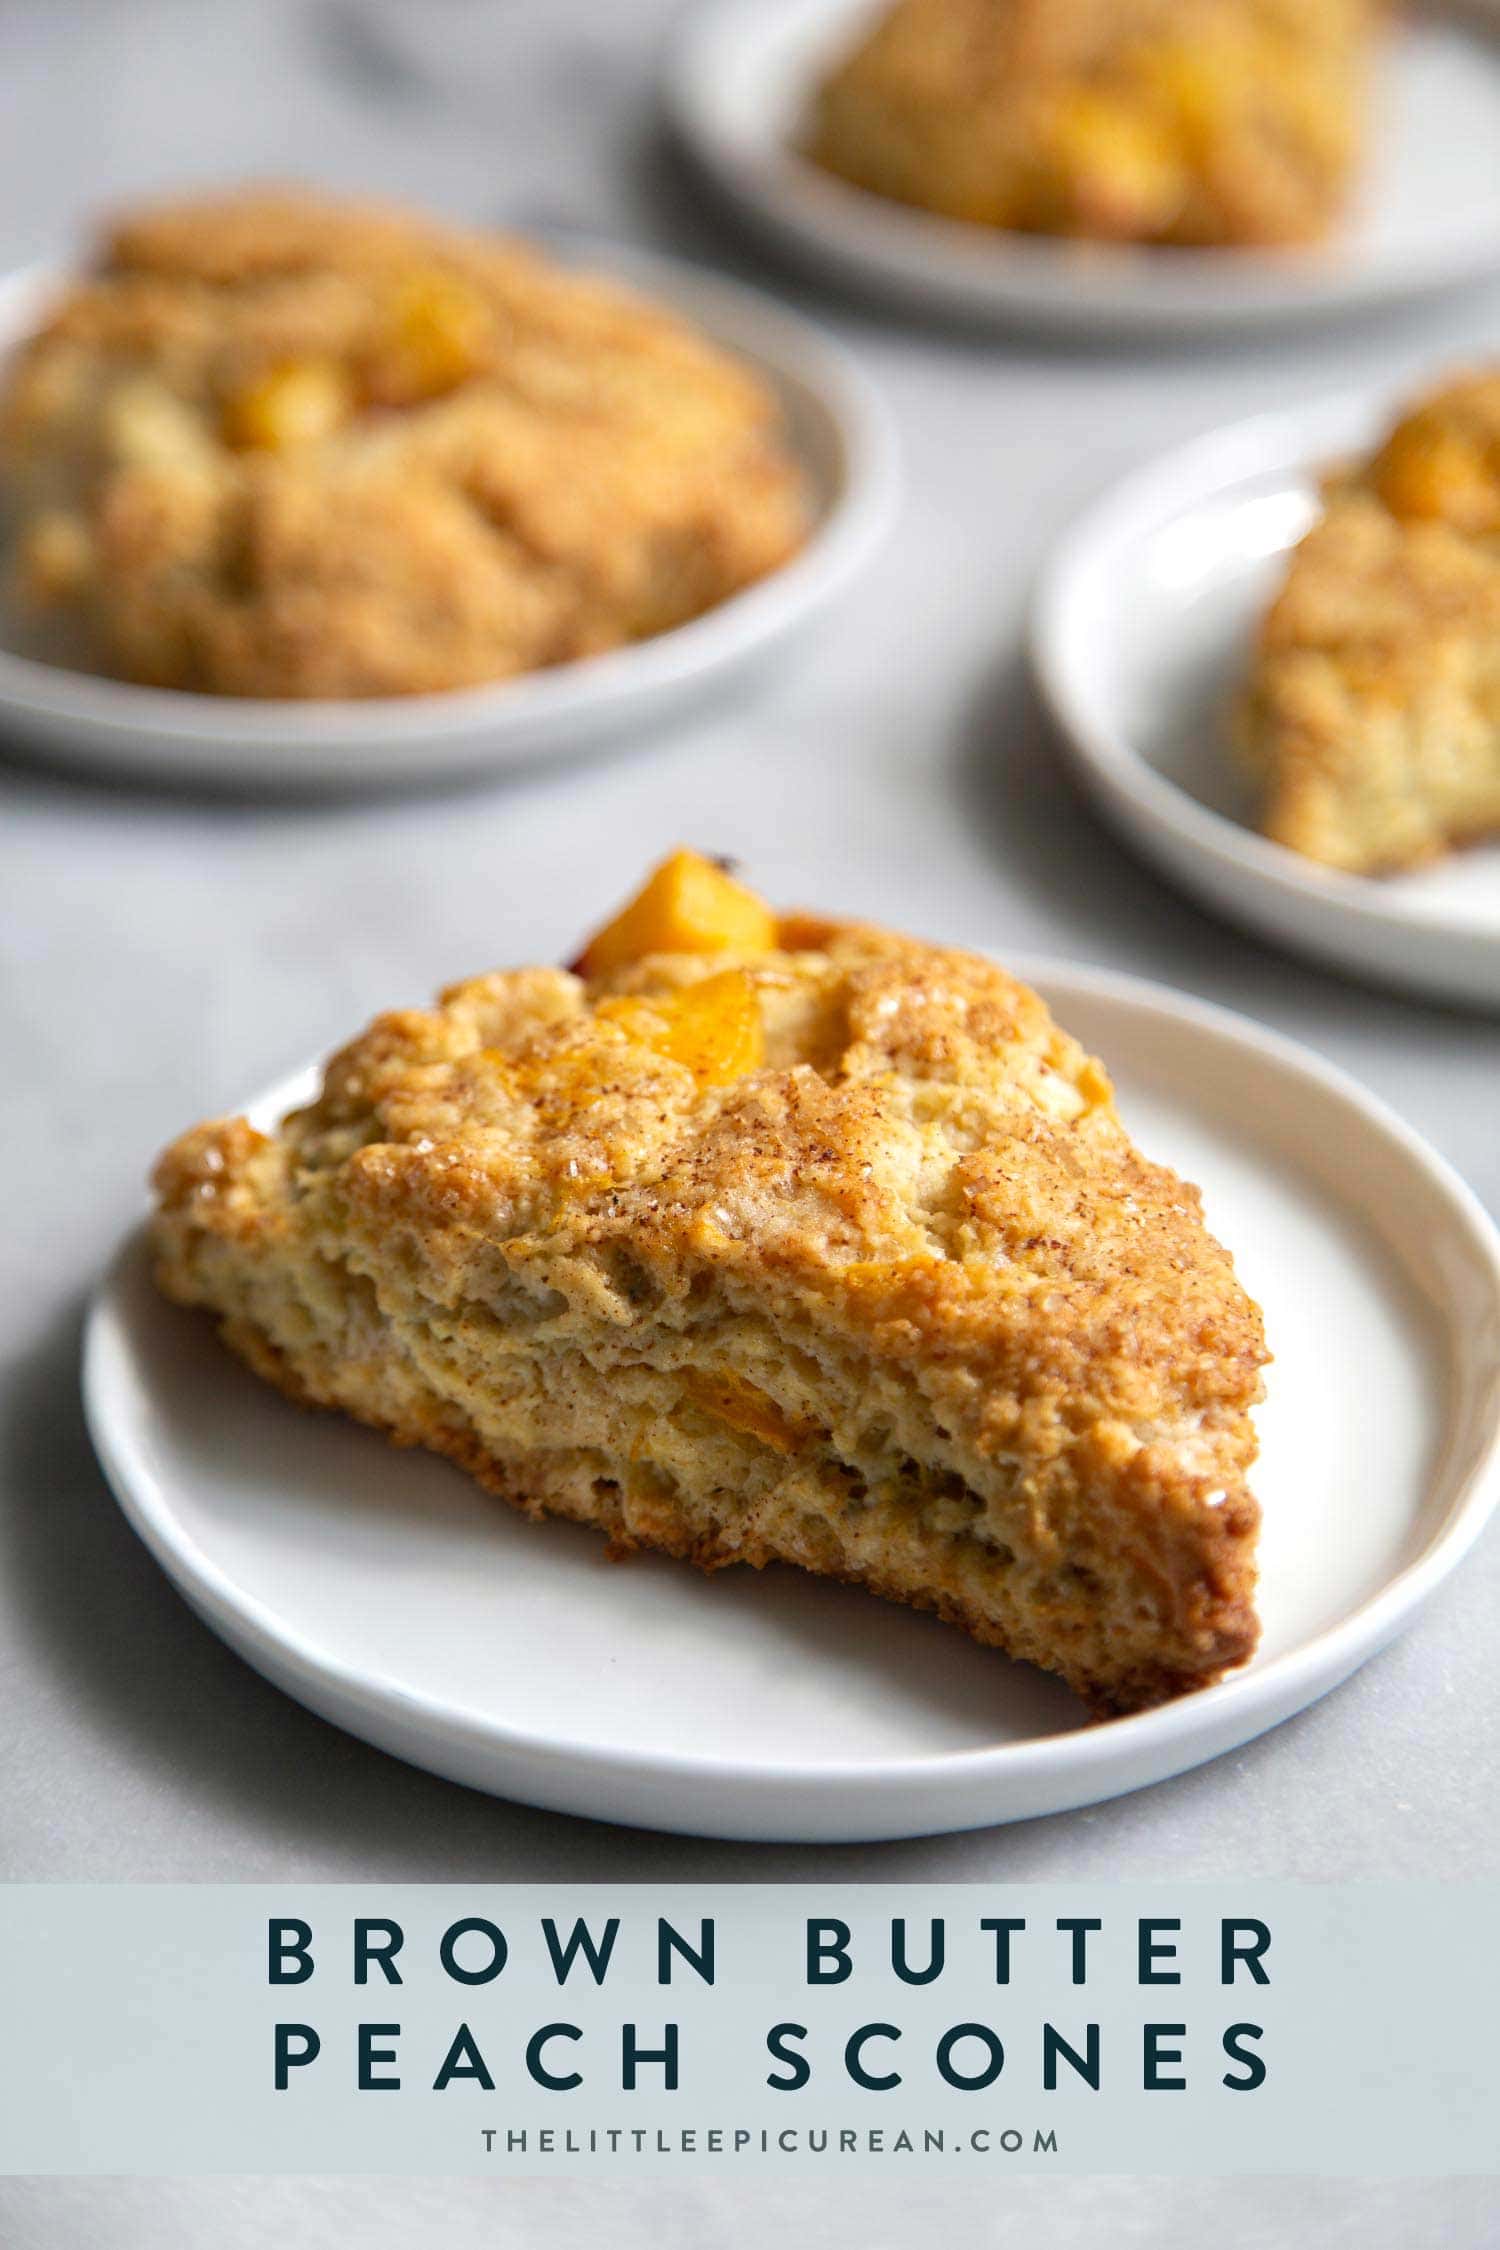 Brown Butter Peach Scones. These easy to make summer scones are made with fresh peach chunks and brushed with nutty brown butter. 